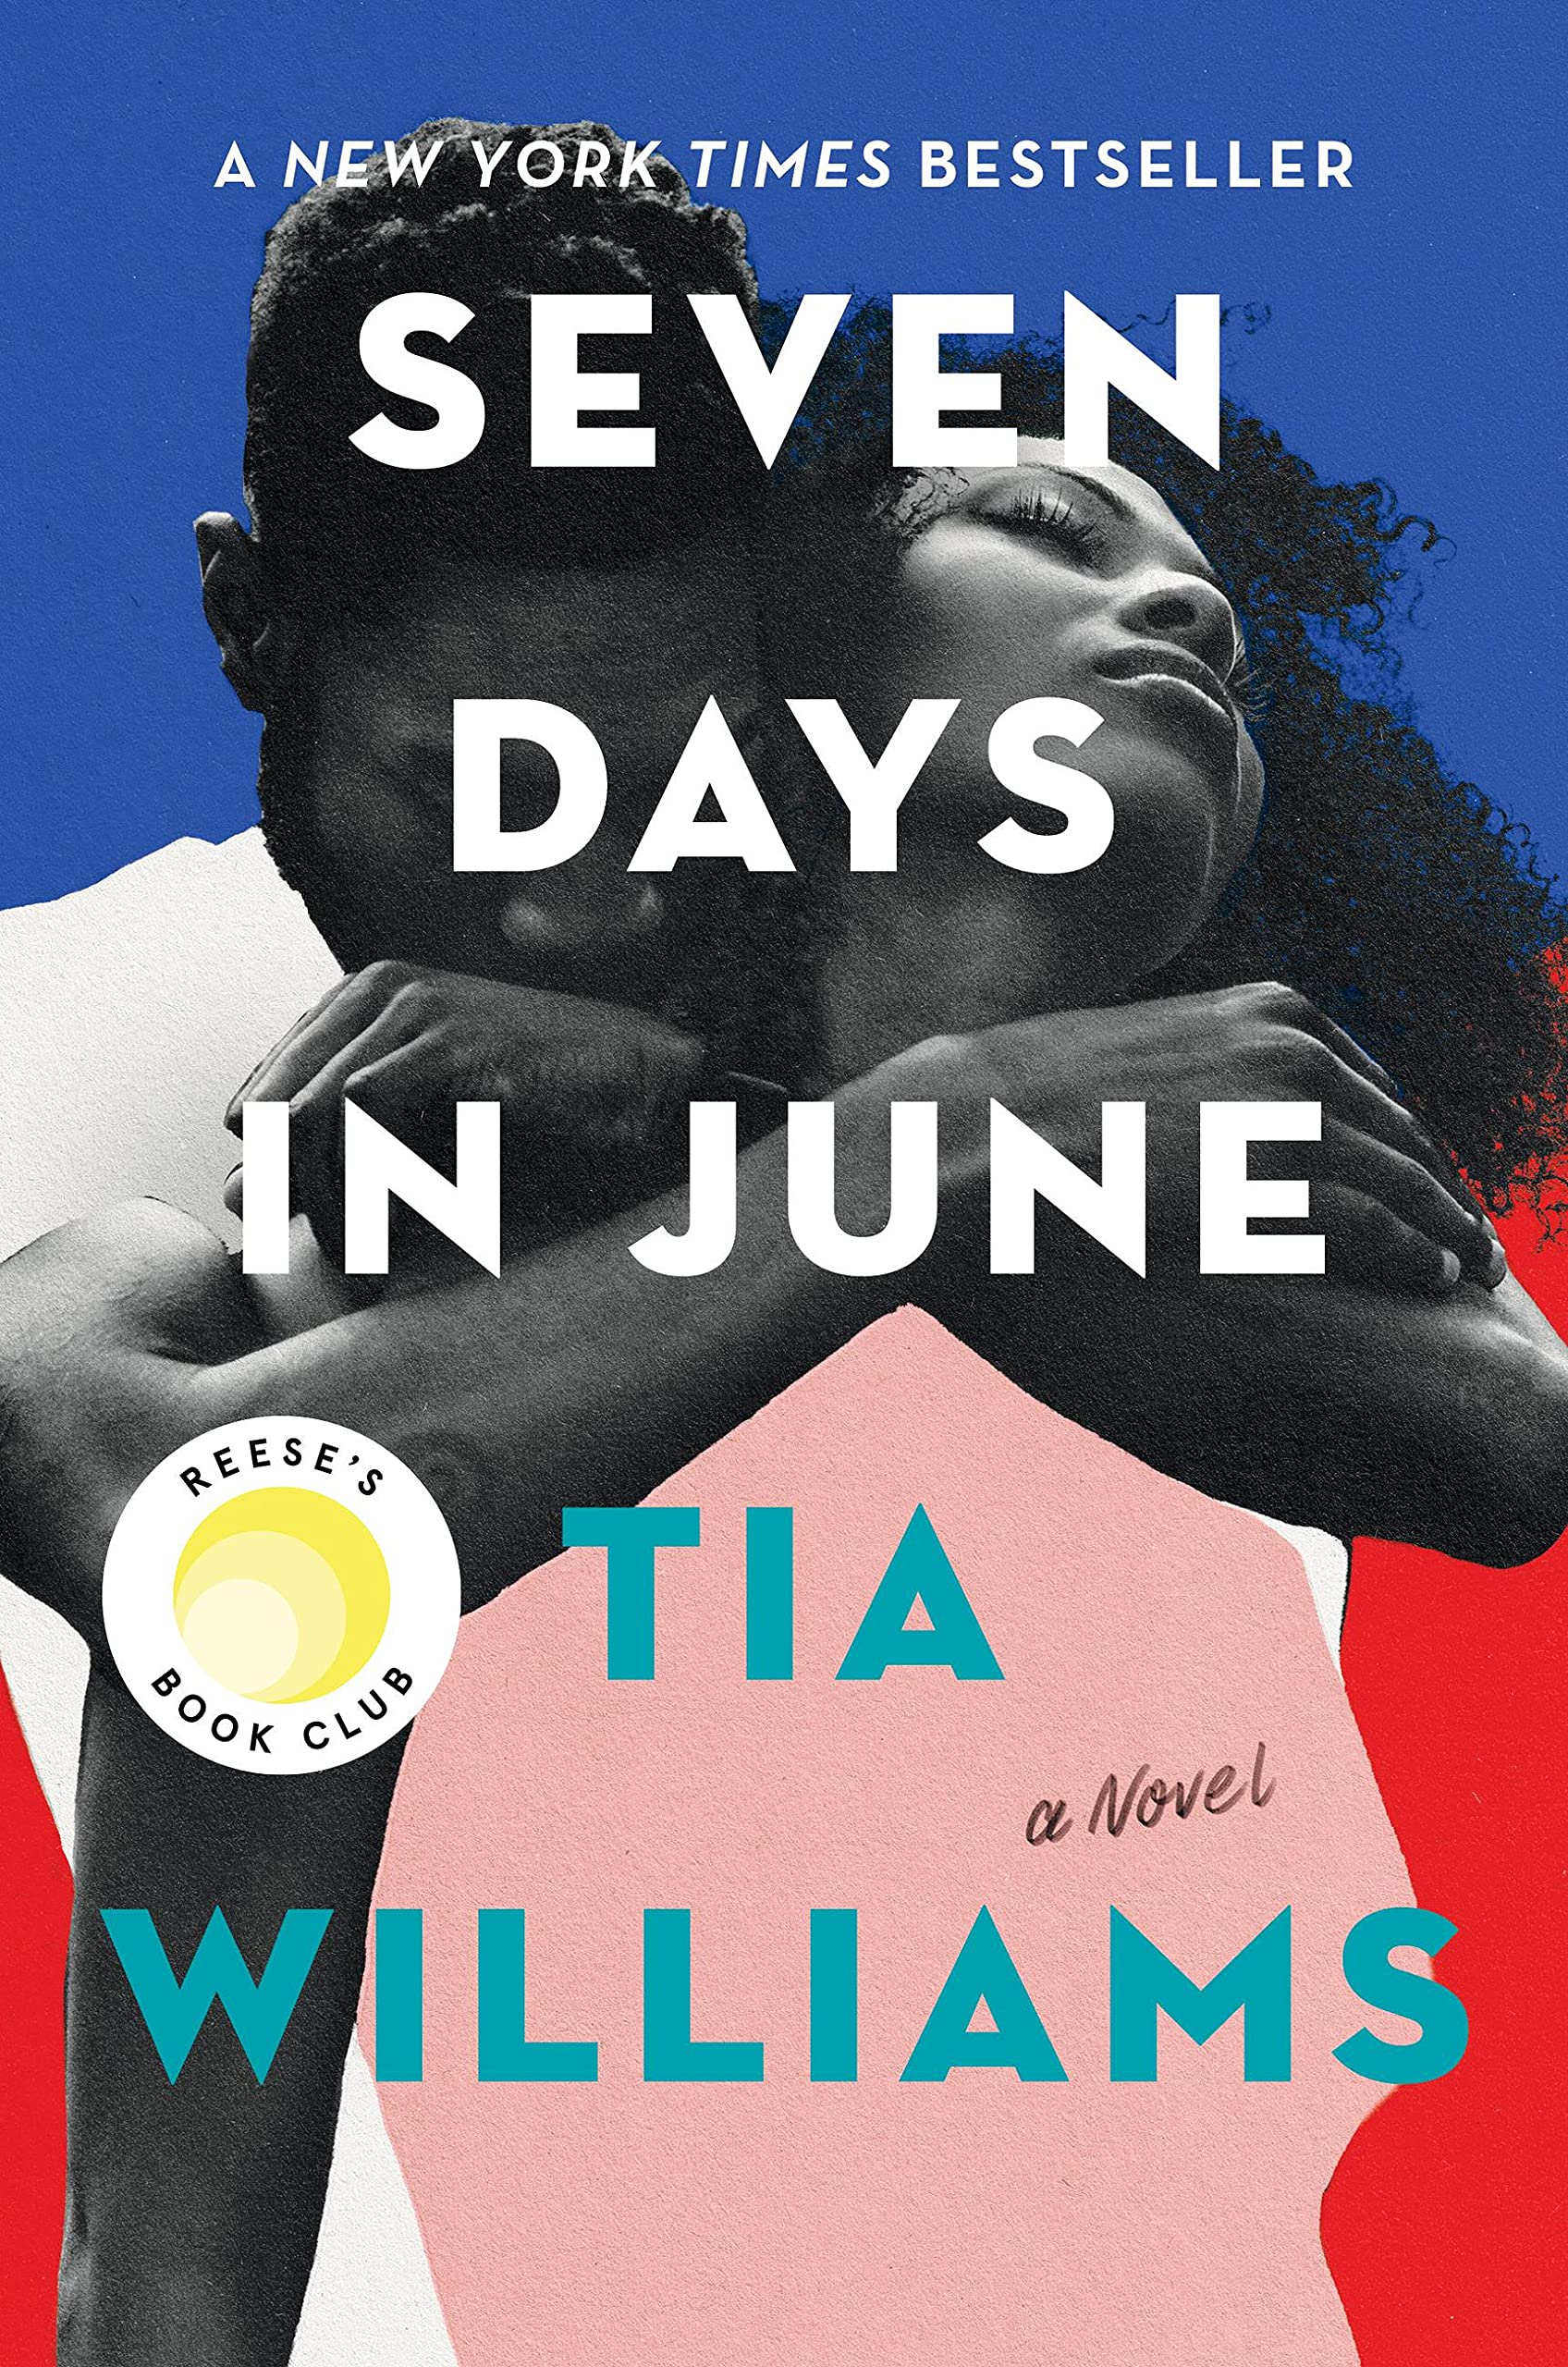 Must Read Books for Summer: Seven Days in June